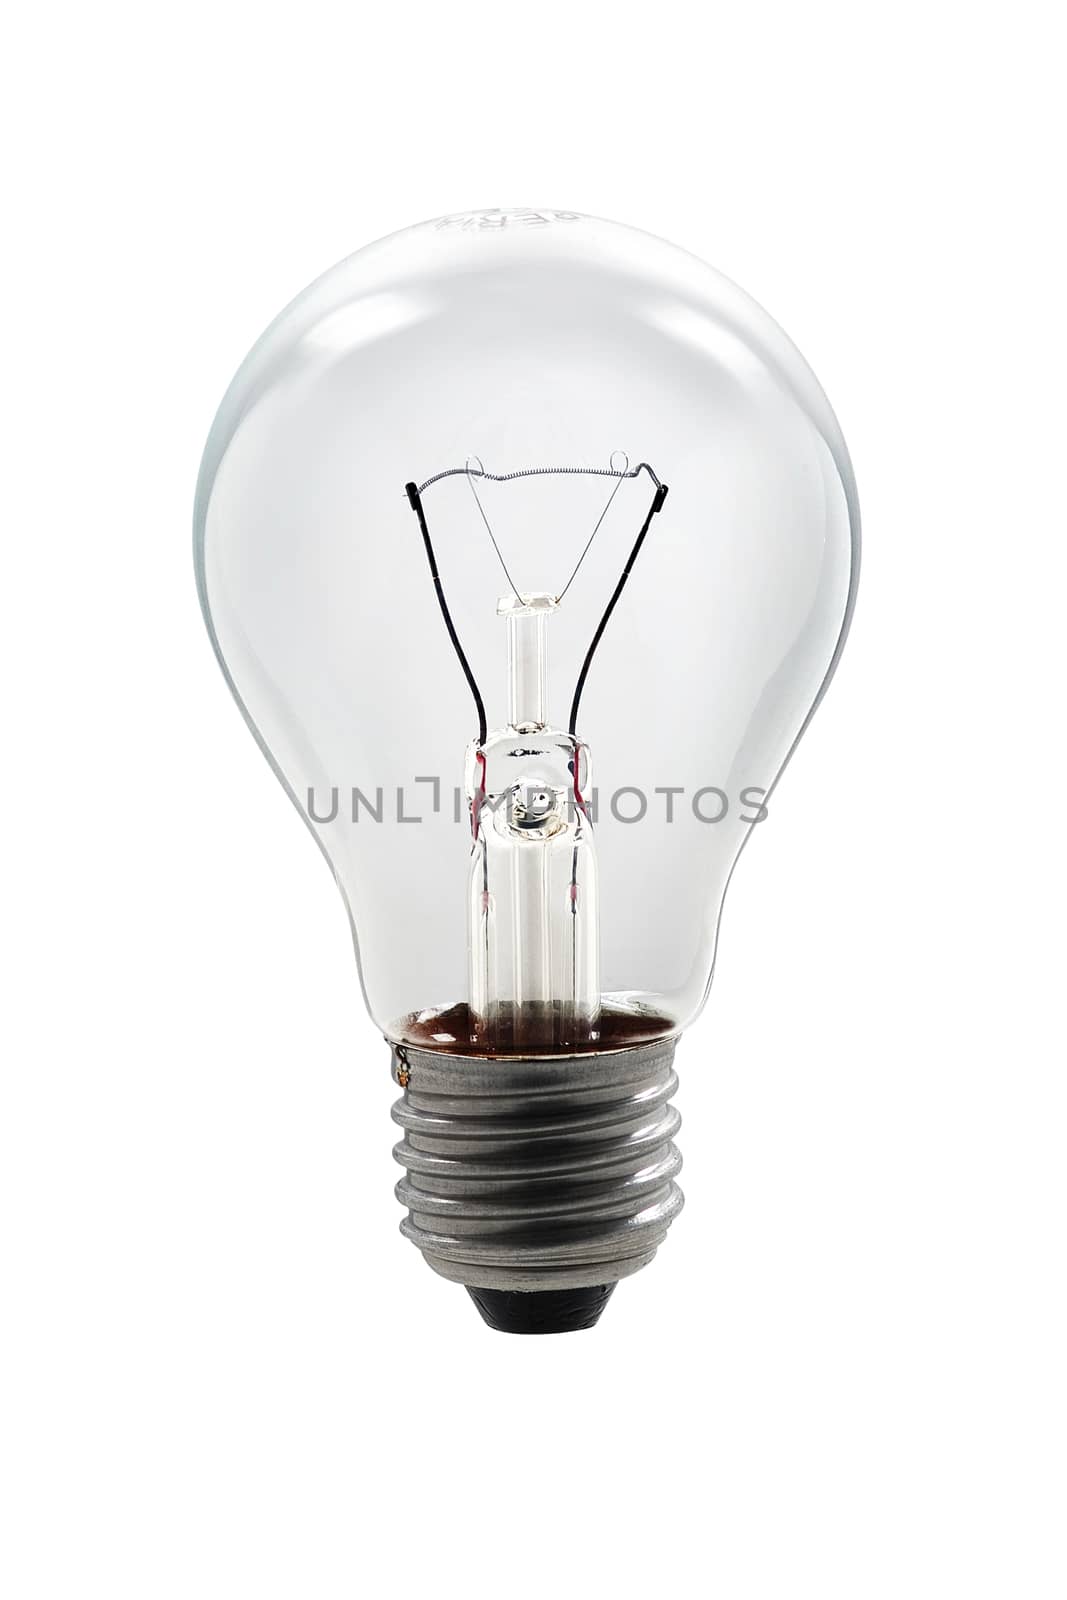 bulb lamp with